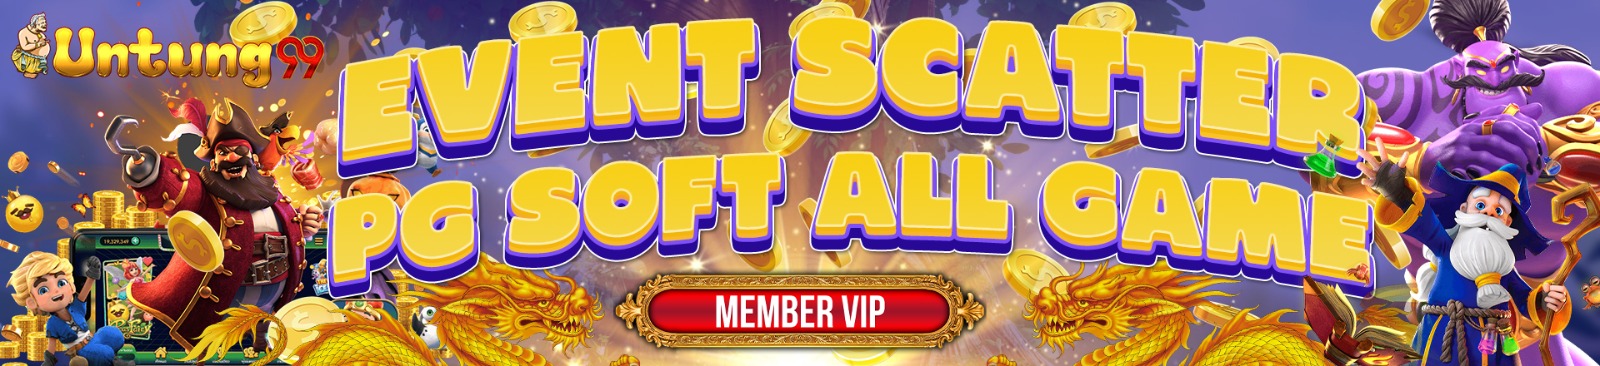 EVENT SCATTER All PGSOFT VIP UNTUNG99